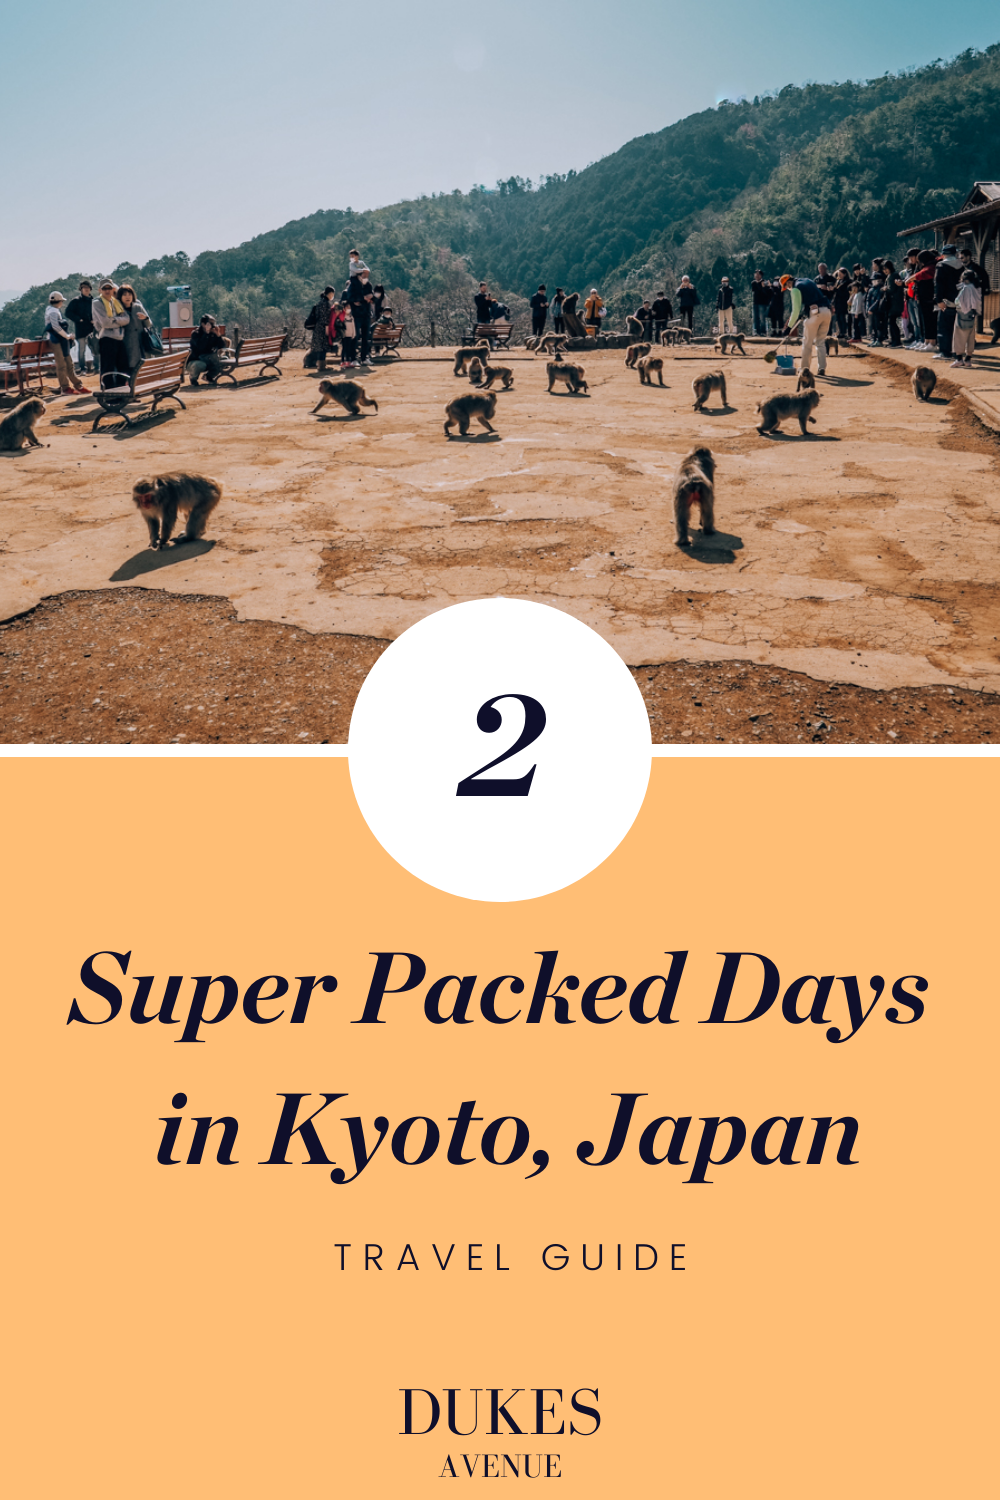 Monkeys and people on a hill with text overlay "2 Super Packed Days in Kyoto, Japan"